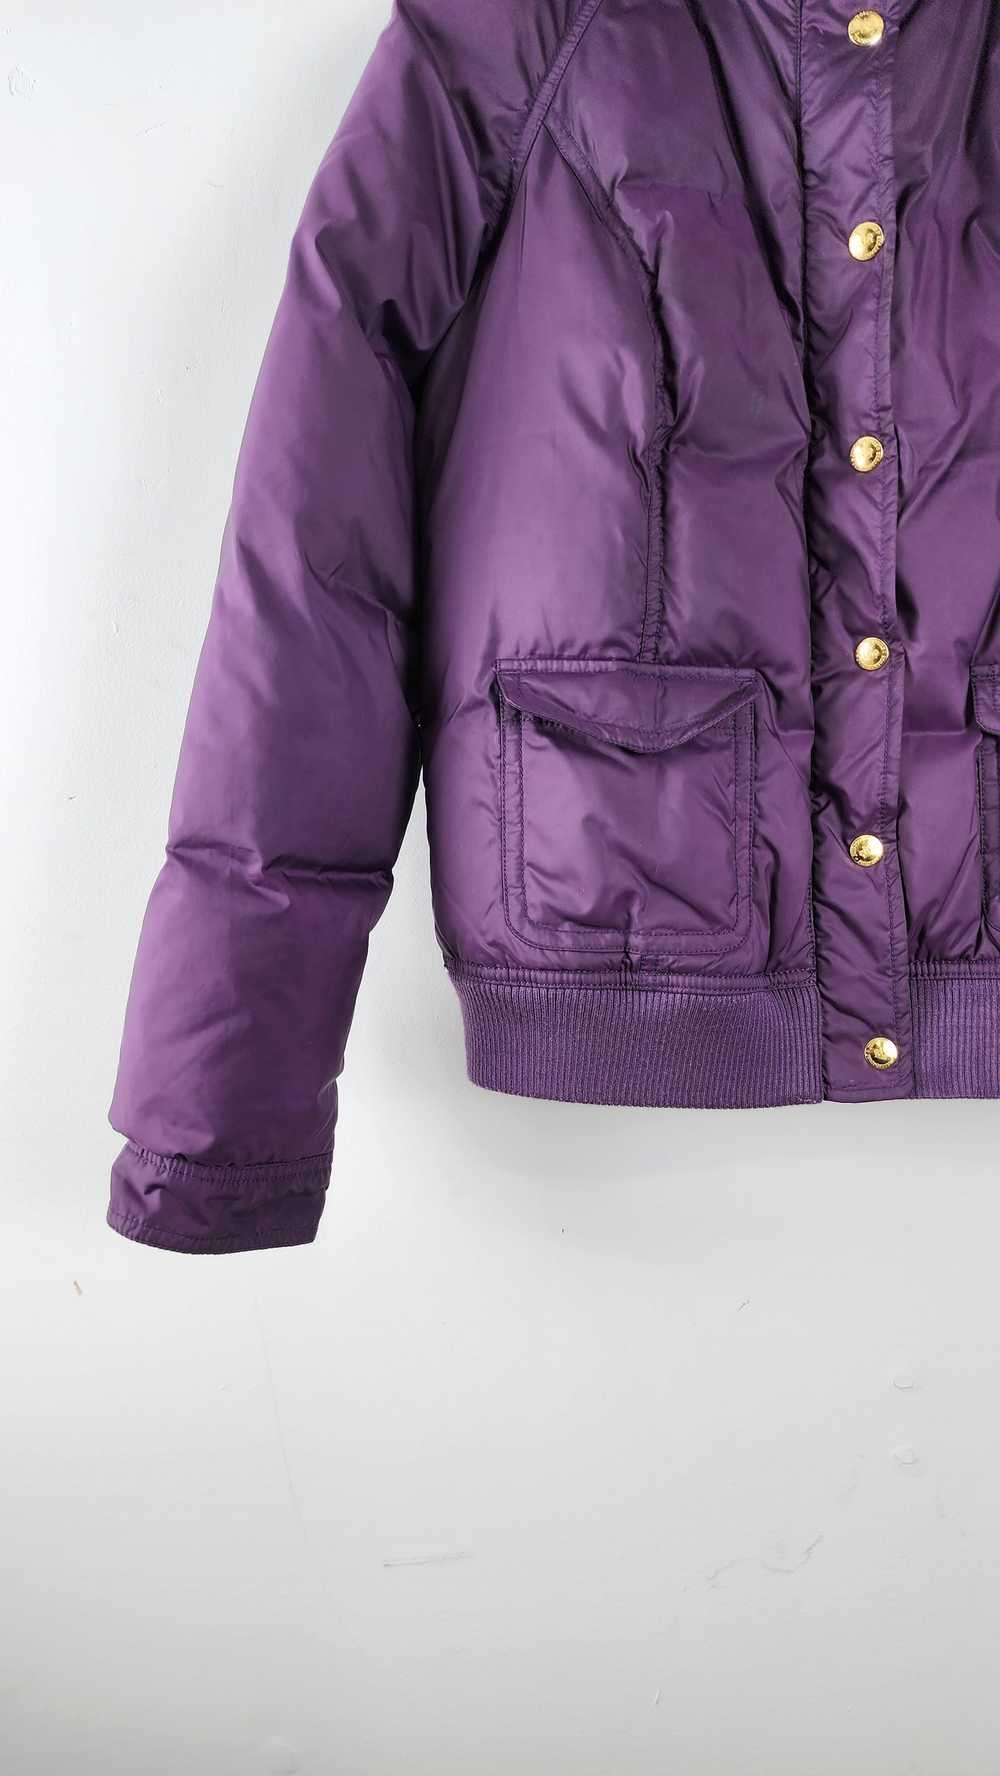 Juicy Couture Juicy Couture puffer with hoodie - image 7